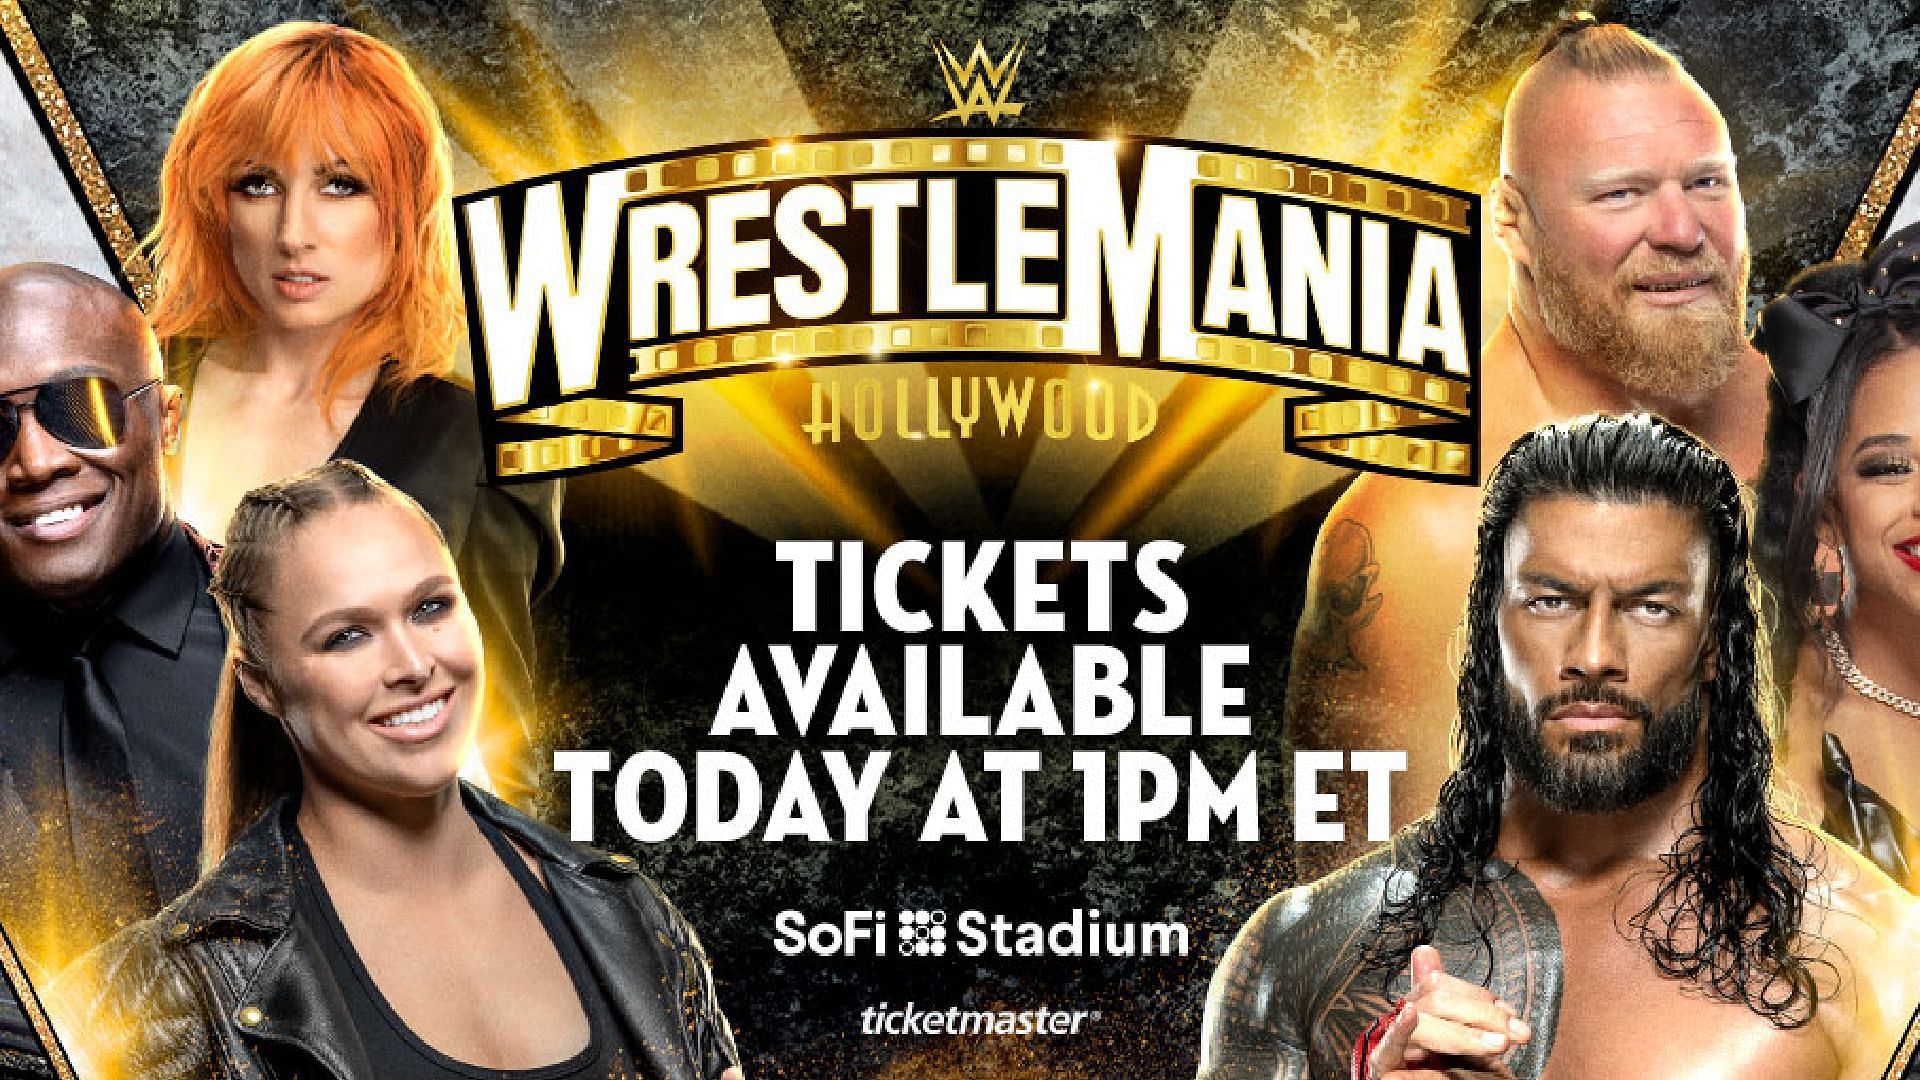 WWE announces major event for WrestleMania weekend lineup